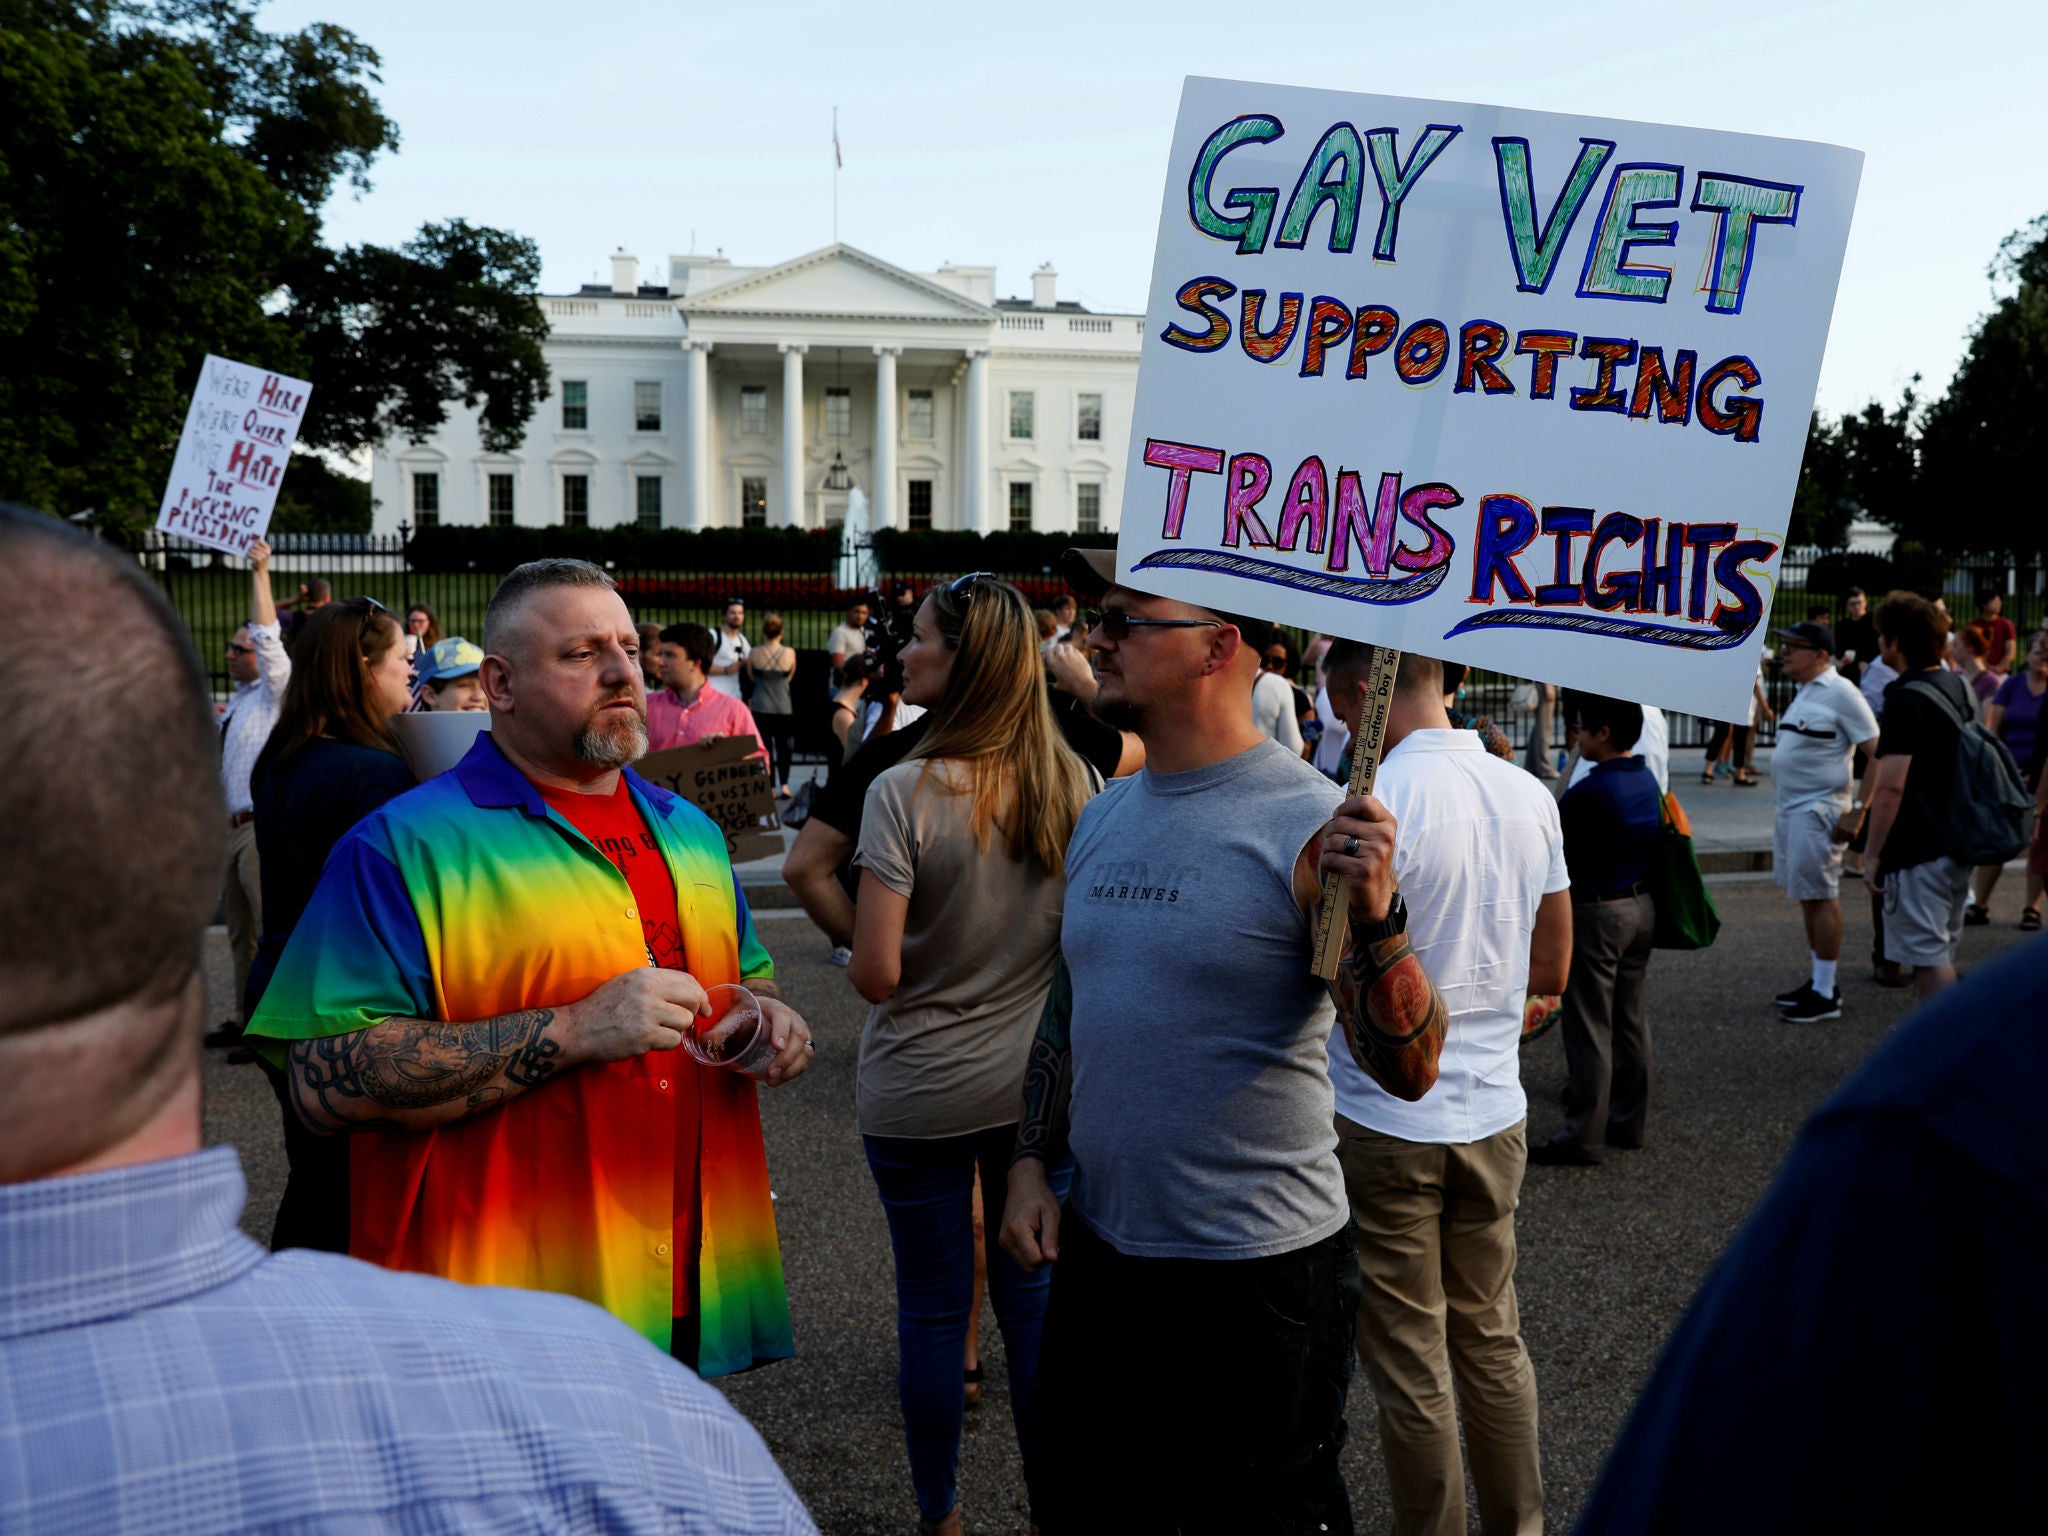 The President’s attempts to bar trans service members was met with widespread outrage and protests